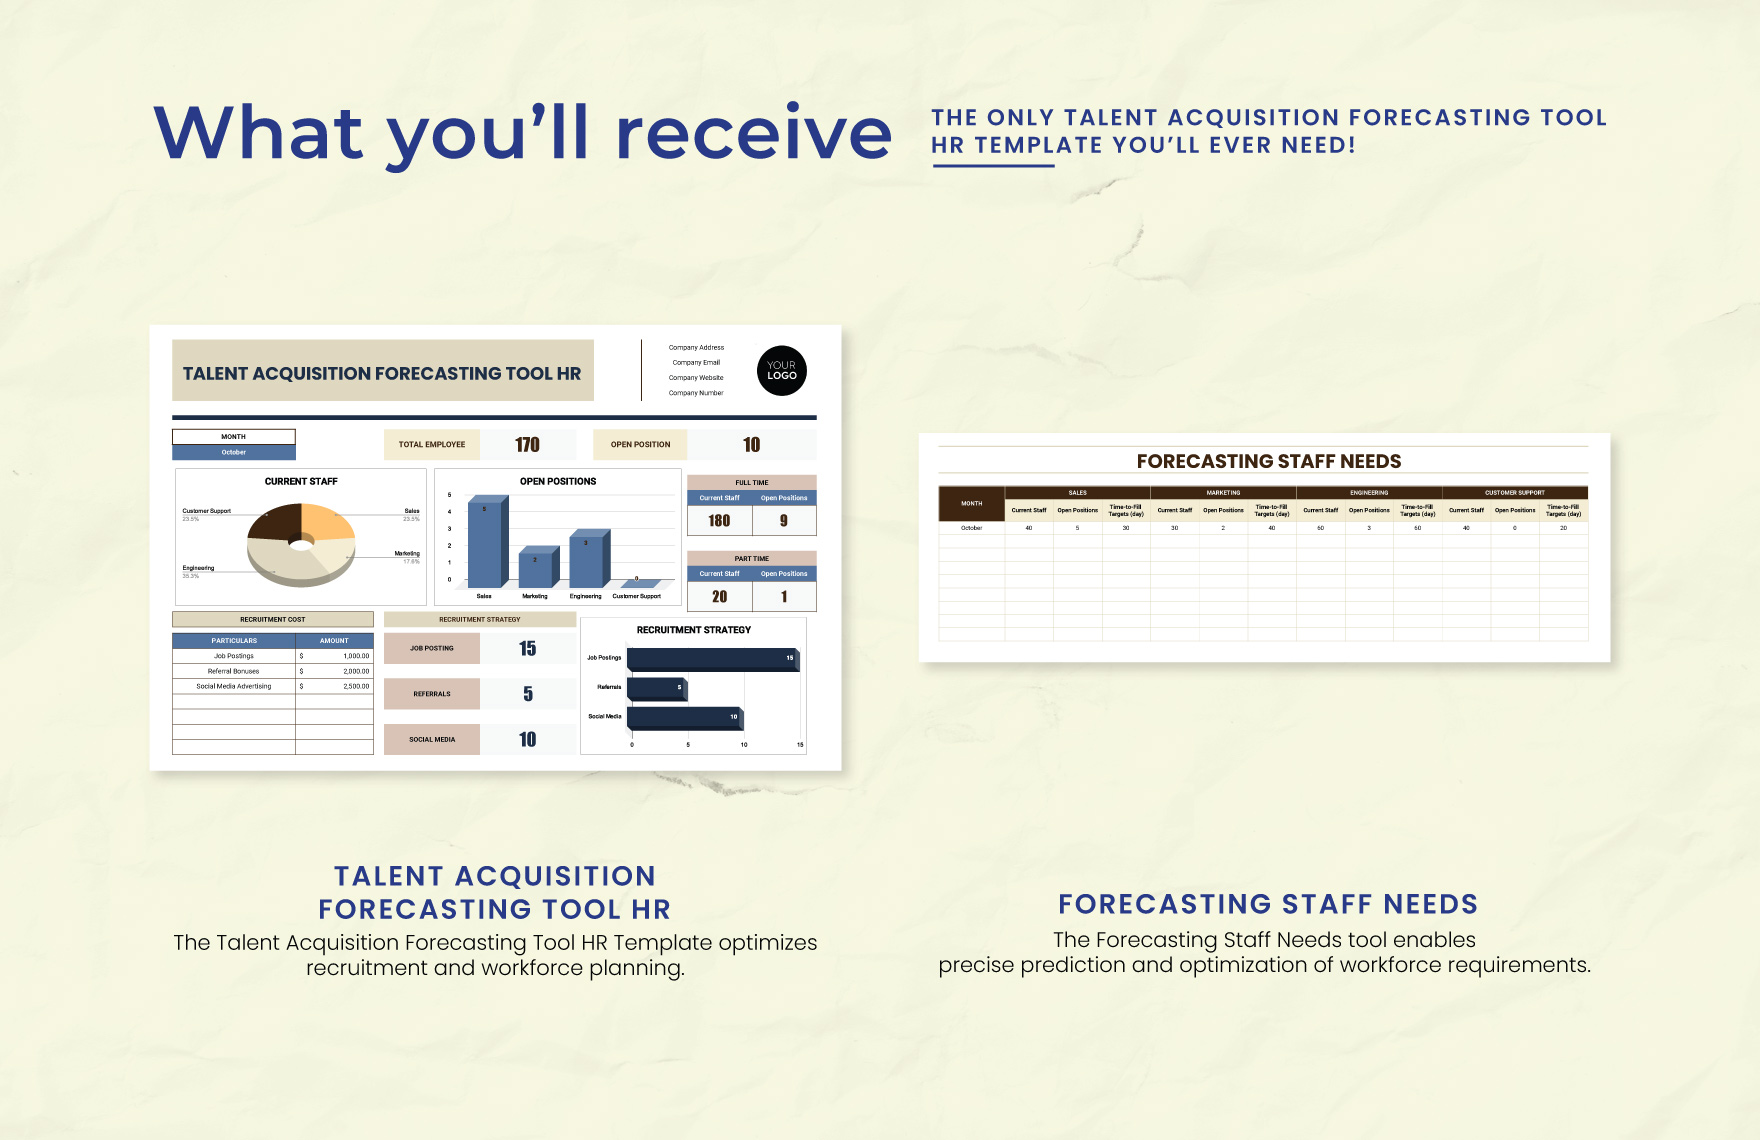 Talent Acquisition Forecasting Tool HR Template